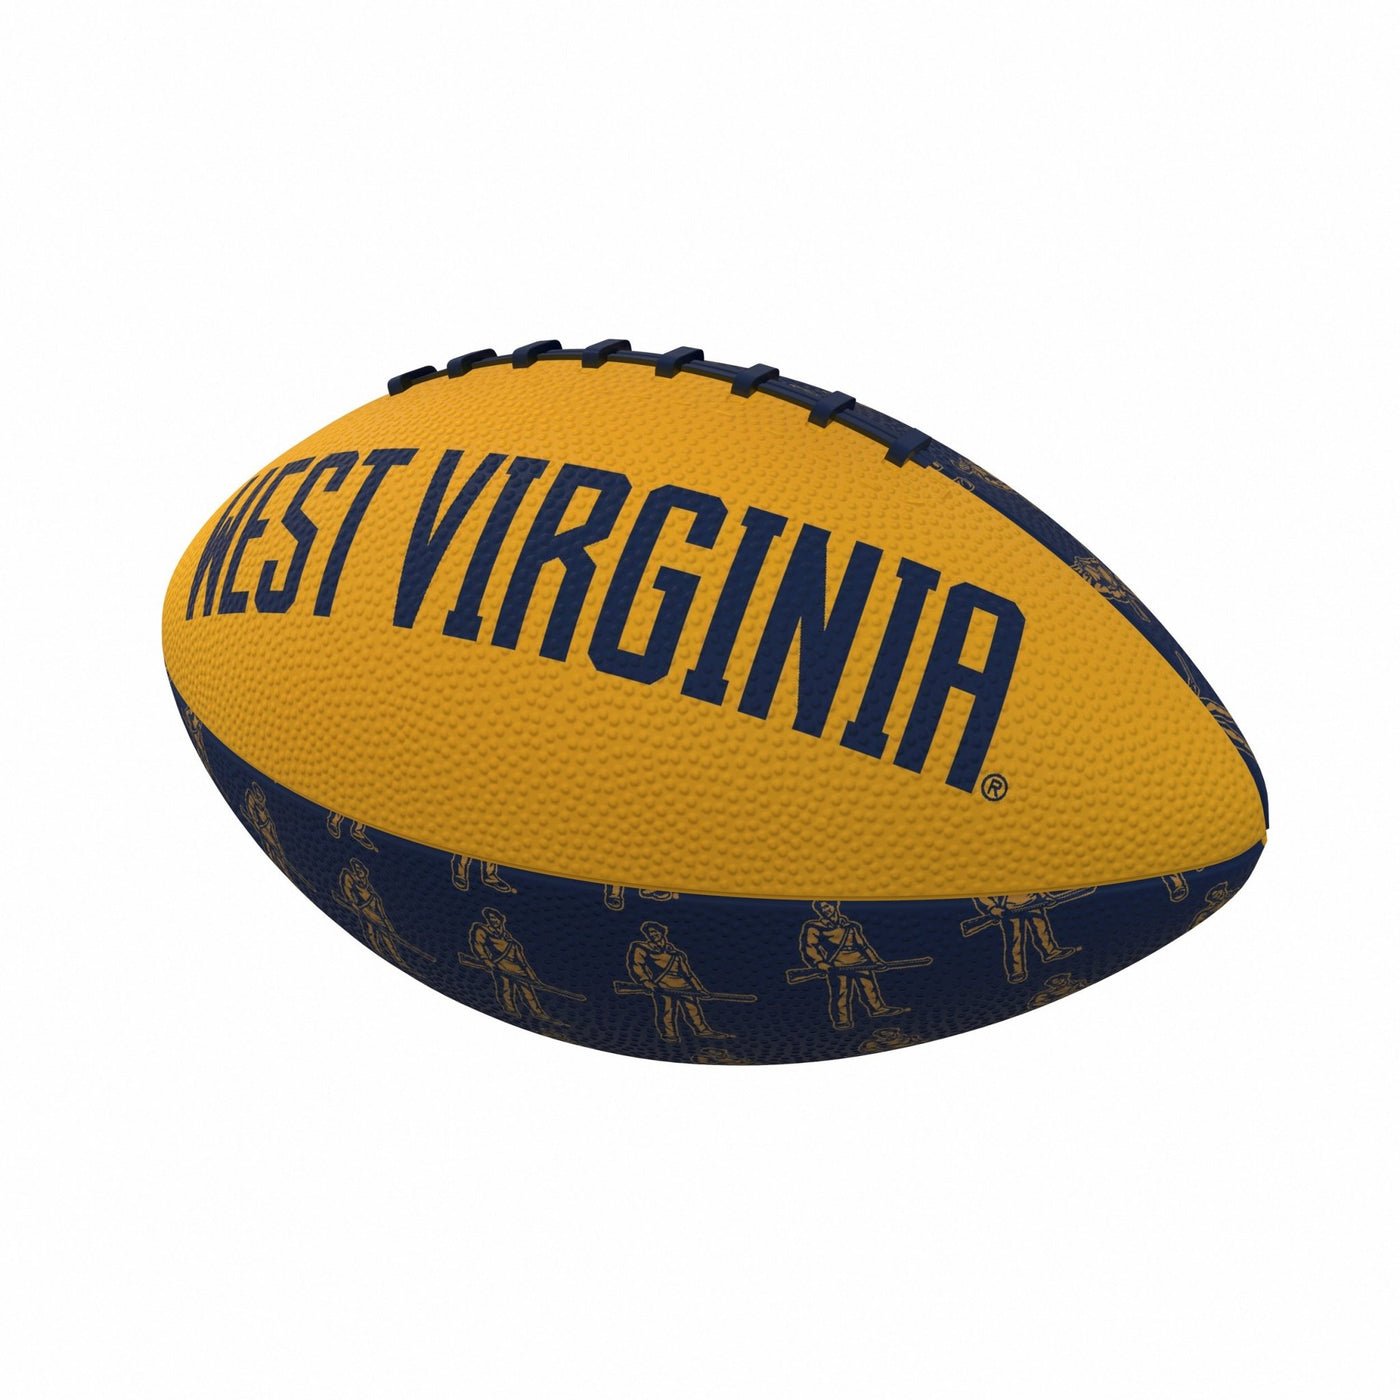 West Virginia Repeating Mini-Size Rubber Football - Logo Brands